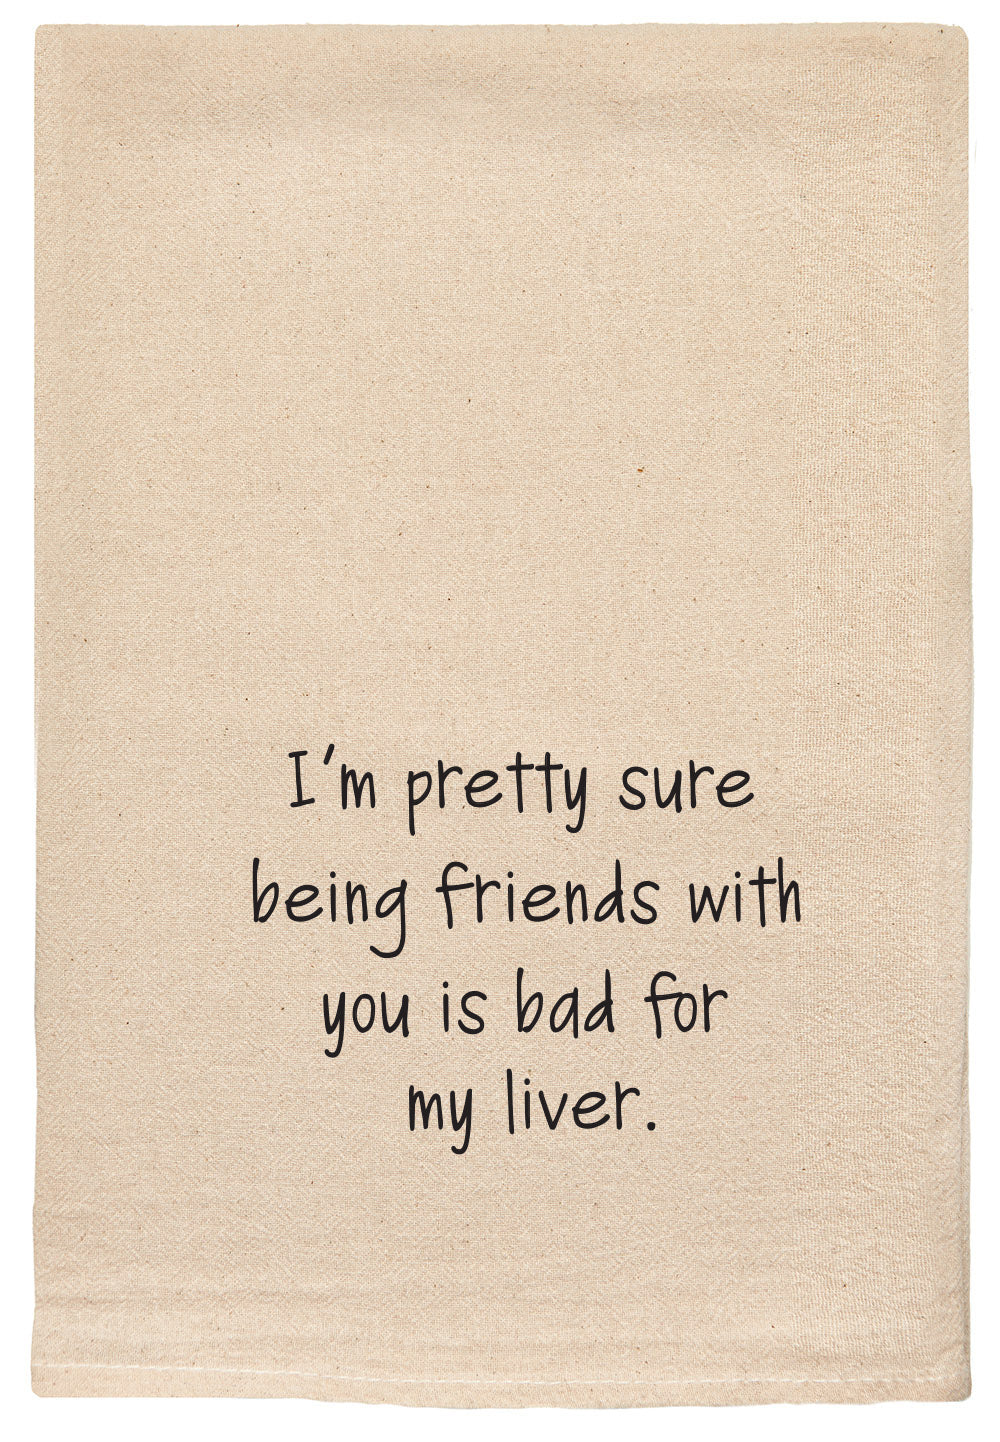 I'm pretty sure being friends with you is bad for my liver.